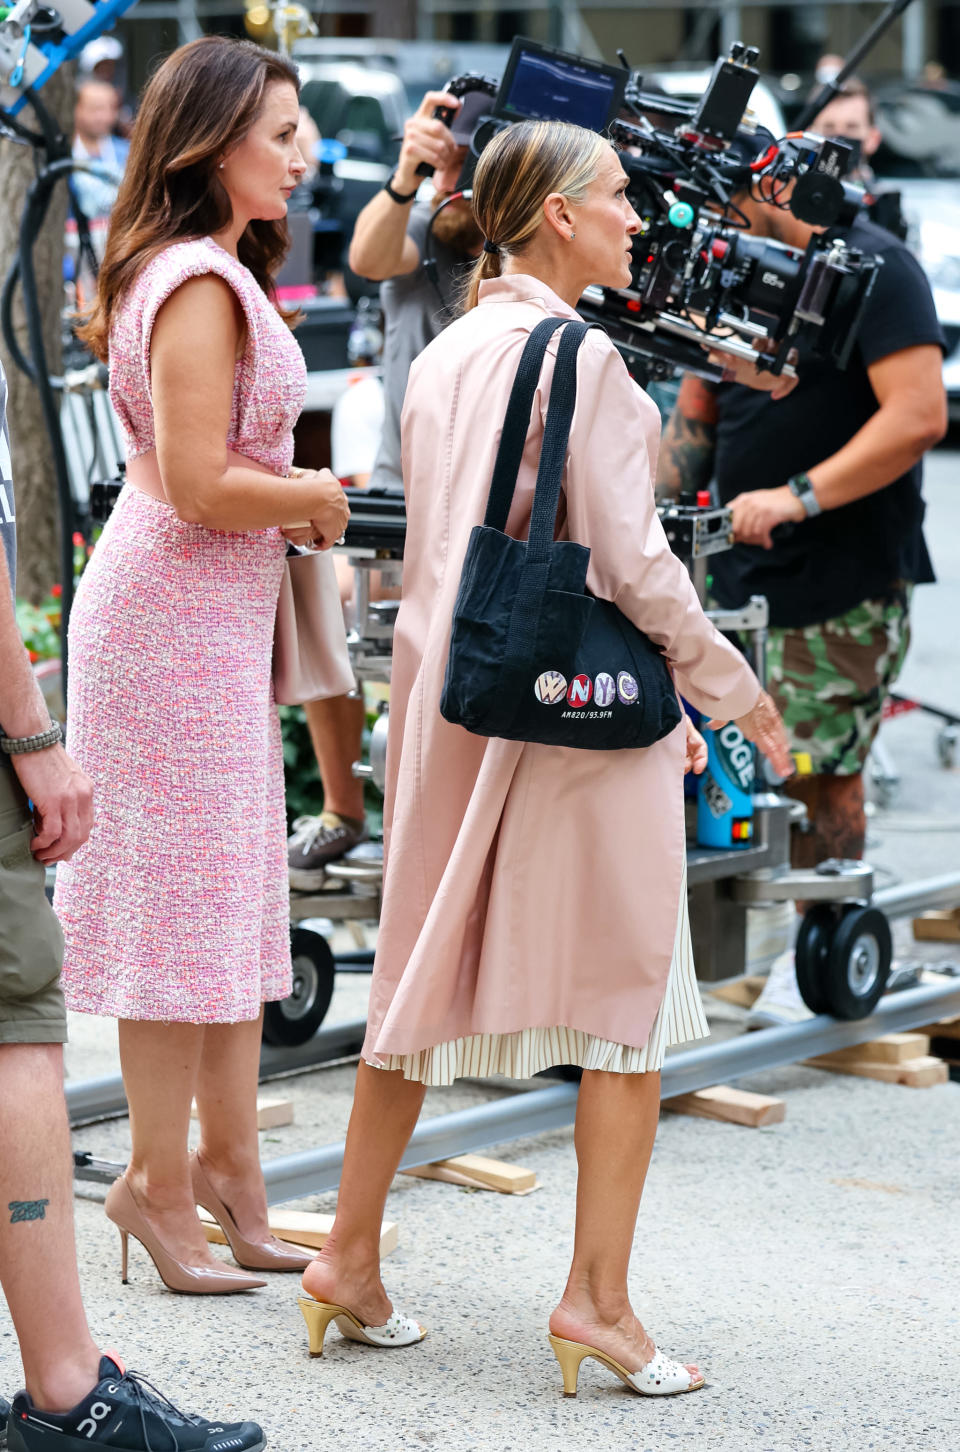 Sarah Jessica Parker and Kristin Davis film ‘And Just Like That’ in New York City. - Credit: Jose Perez/Bauergriffin.com / MEGA